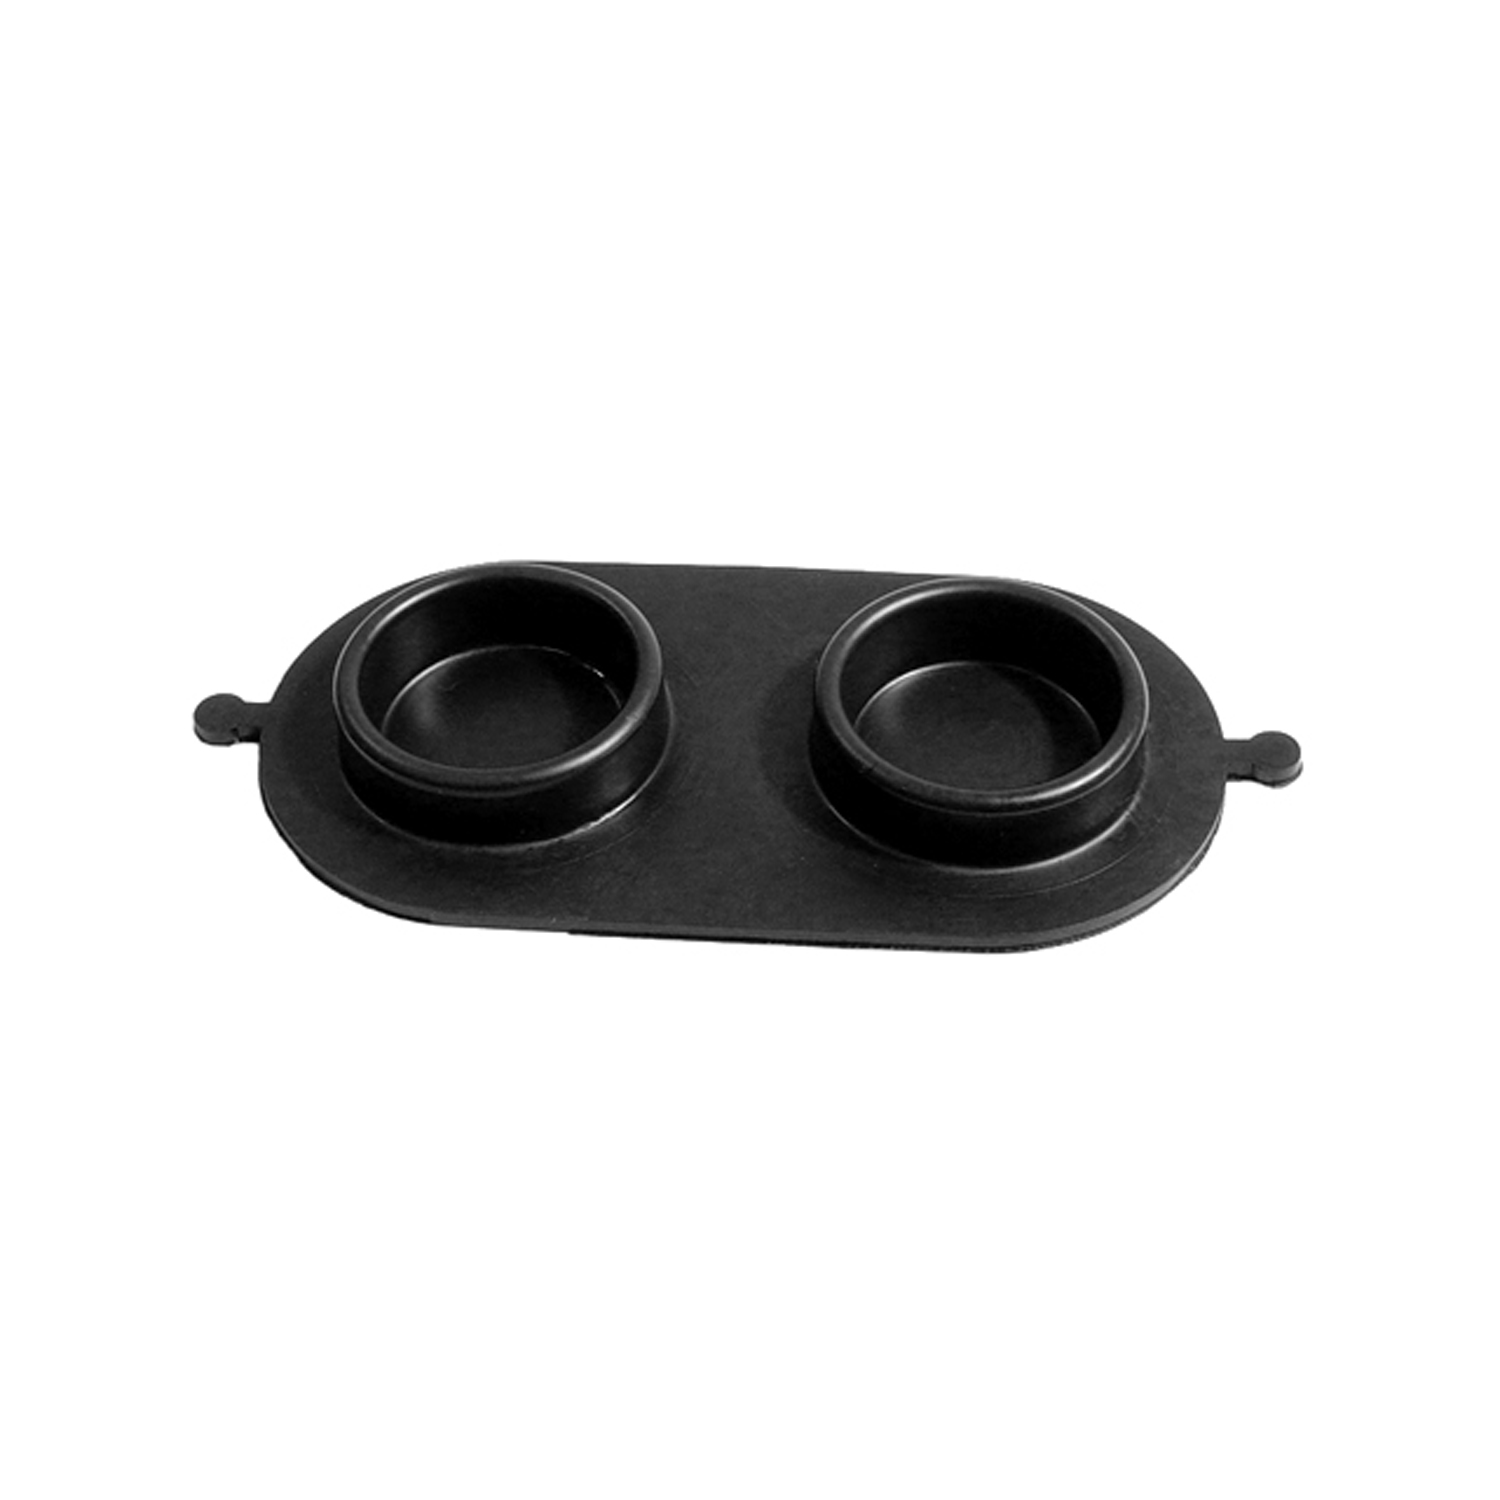 1968 Lincoln Continental Brake Master Cylinder Cover Seal.  Replaces OEM #C7AZ2167-A-RP 2-B